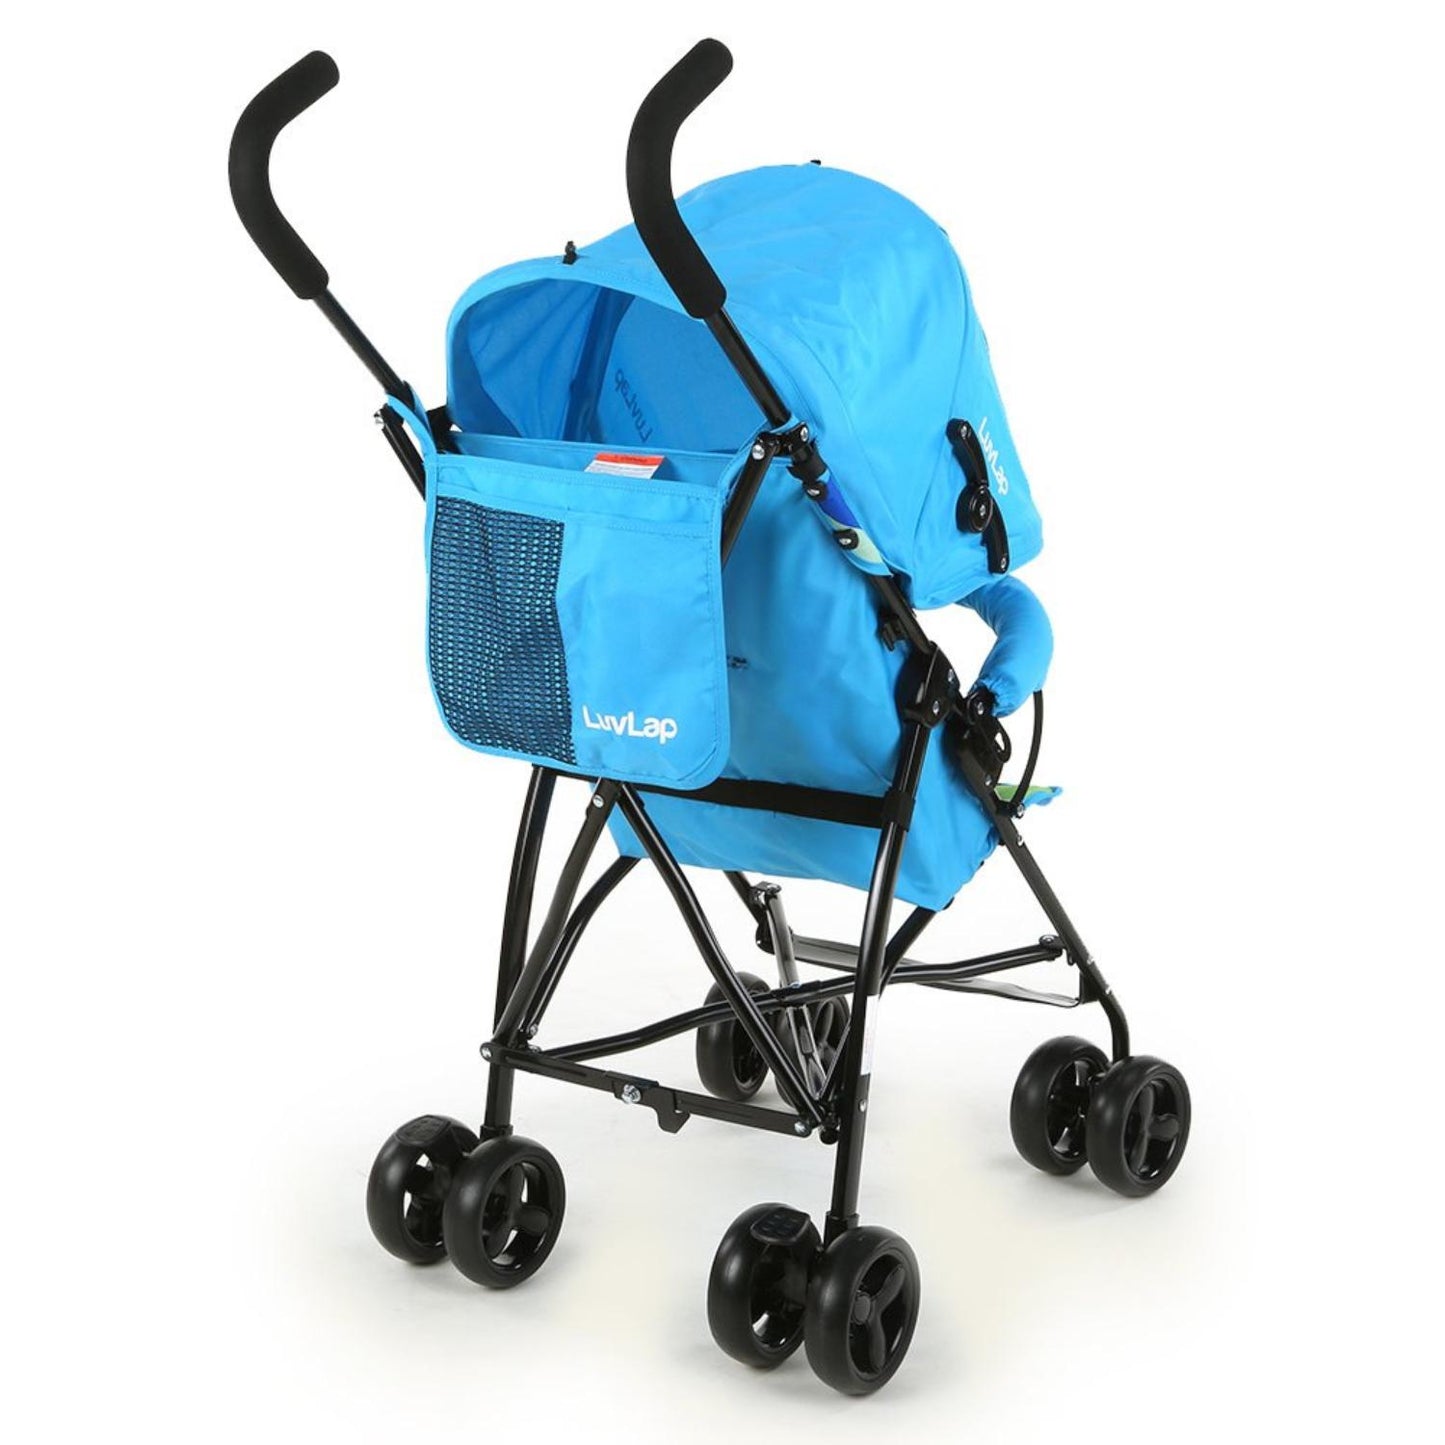 LuvLap Tutti Fruti Compact Travel Baby Stroller/Buggy, 6-36 Months, 5-Point Safety Harness, Adjustable Recline, 15Kg Max, Light Blue-18272